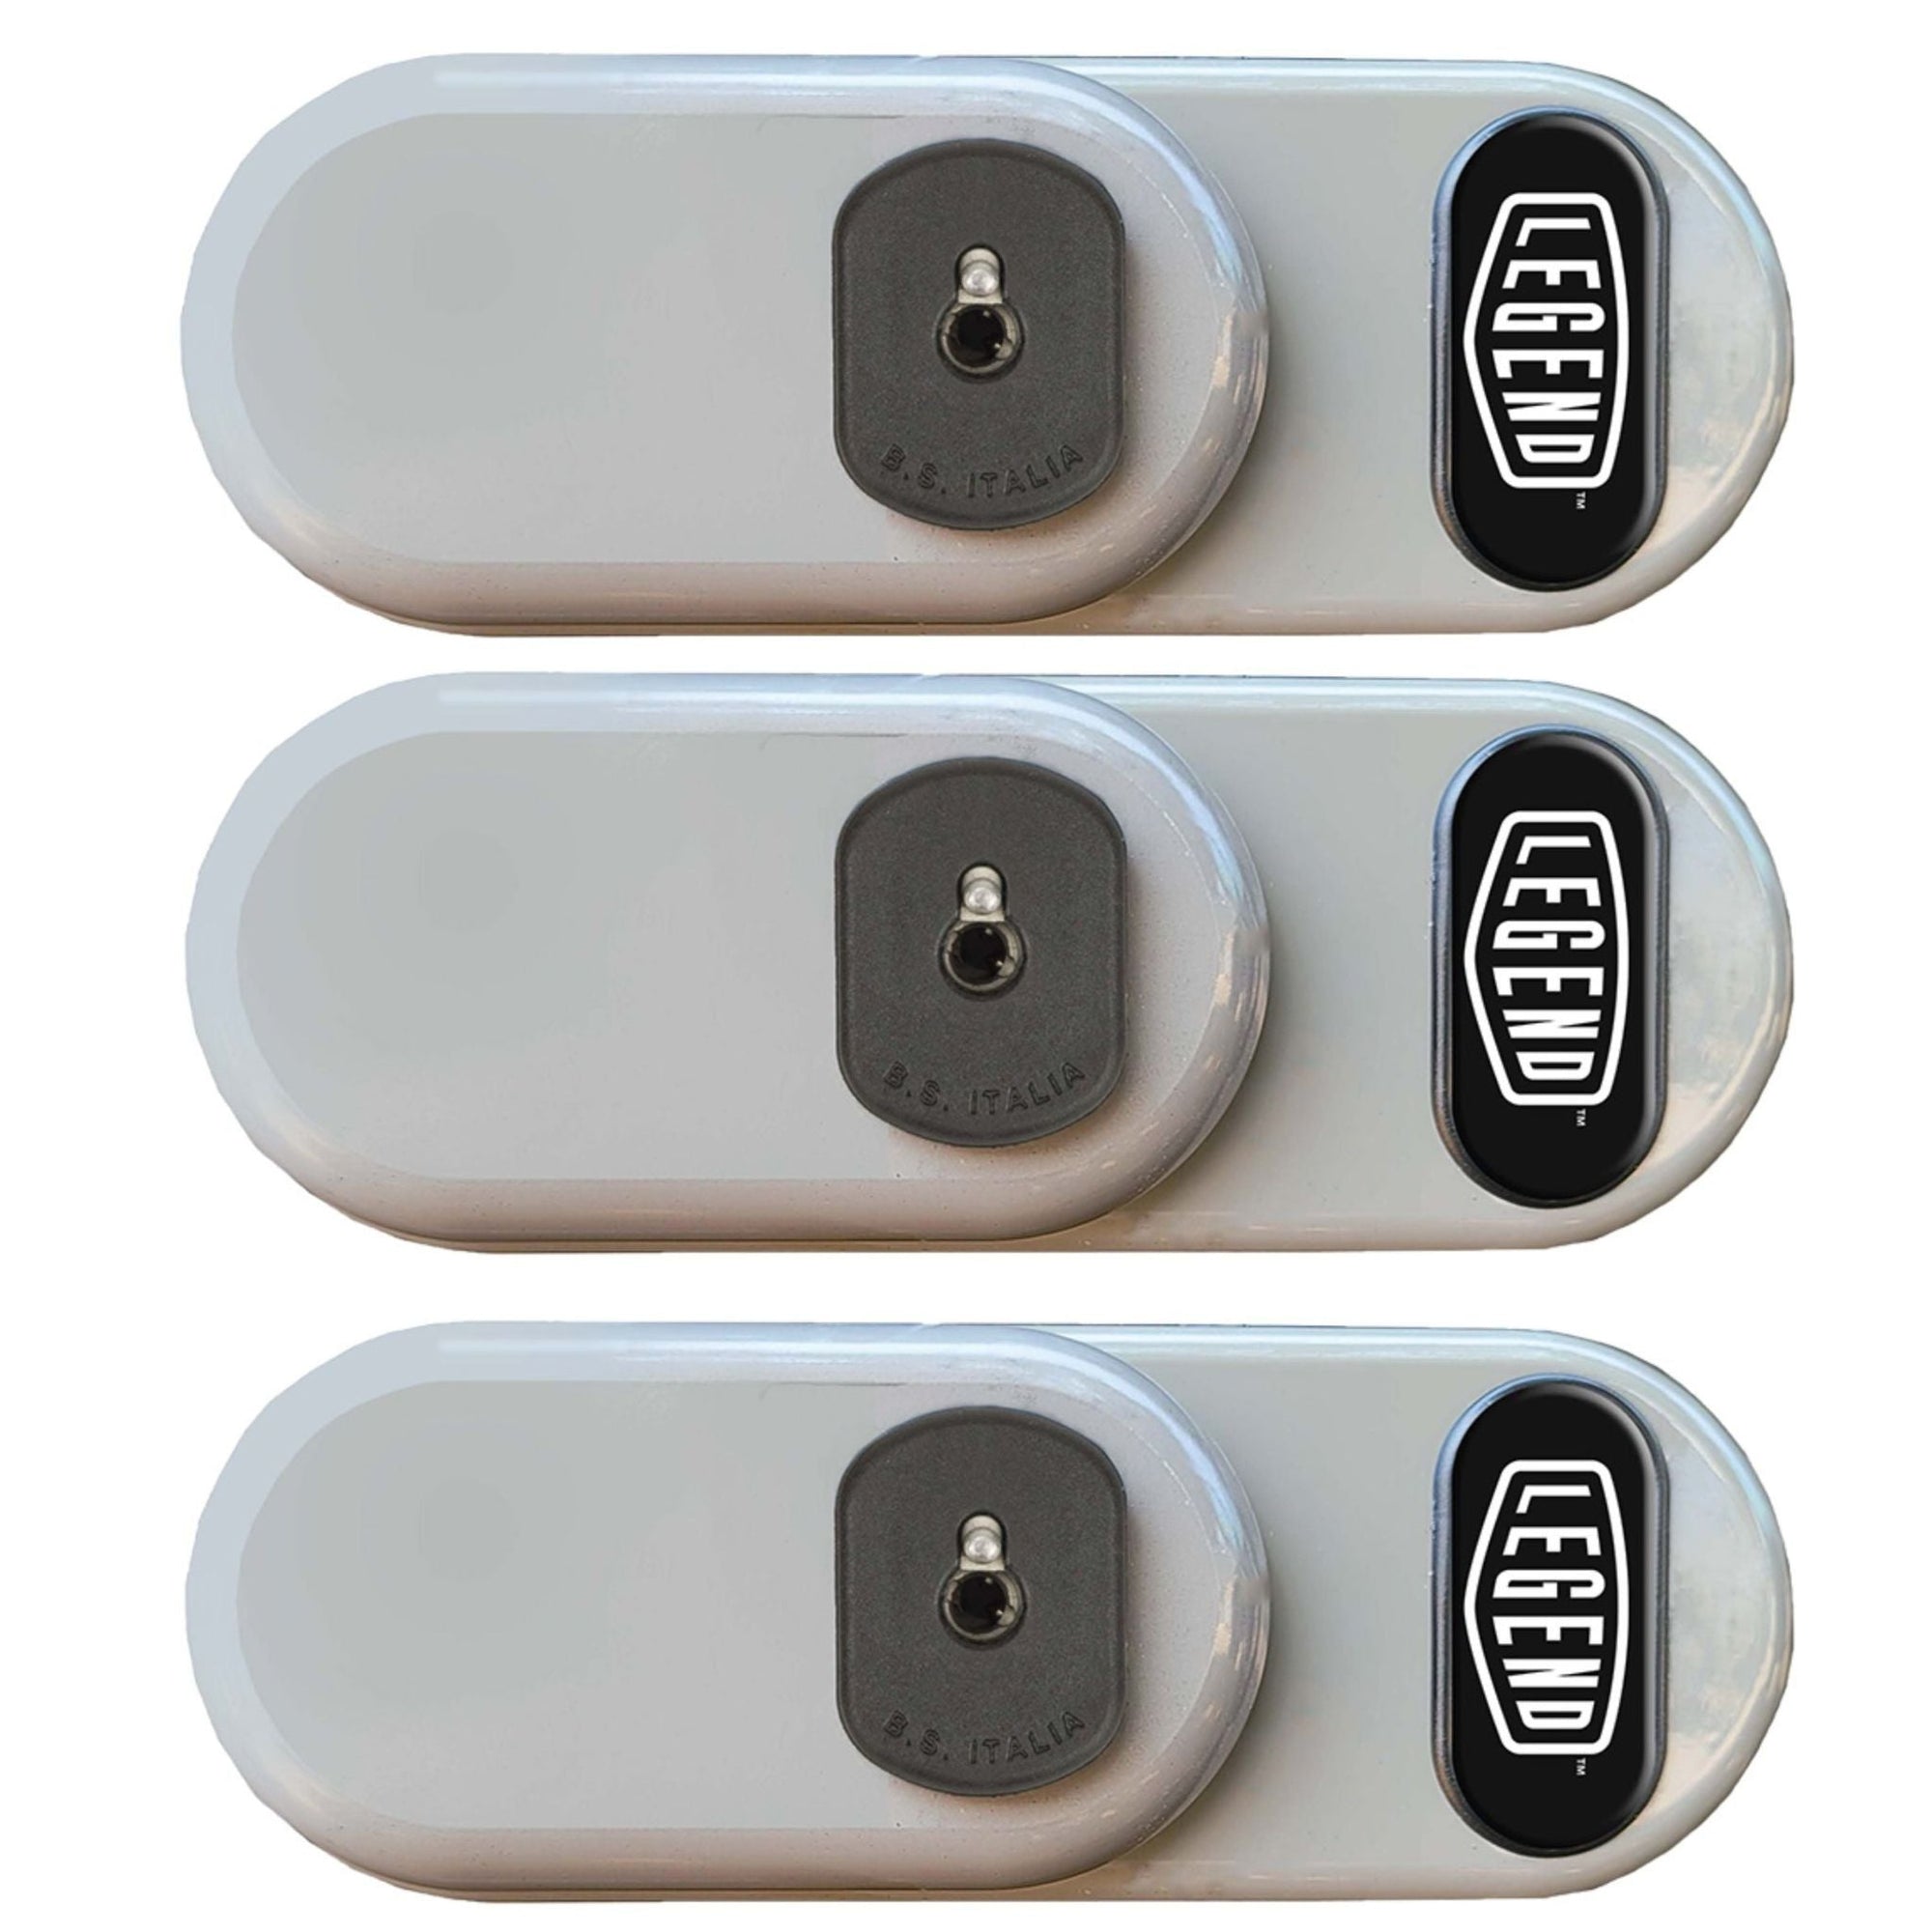 The New Securi-Lock SL1-021-003 Triple Padlock Is a High Security Vehicle Door Lock That Affixes to the Rear and Side of Van Doors for Complete Protection and Safety Against Cargo Theft - The Lock Source